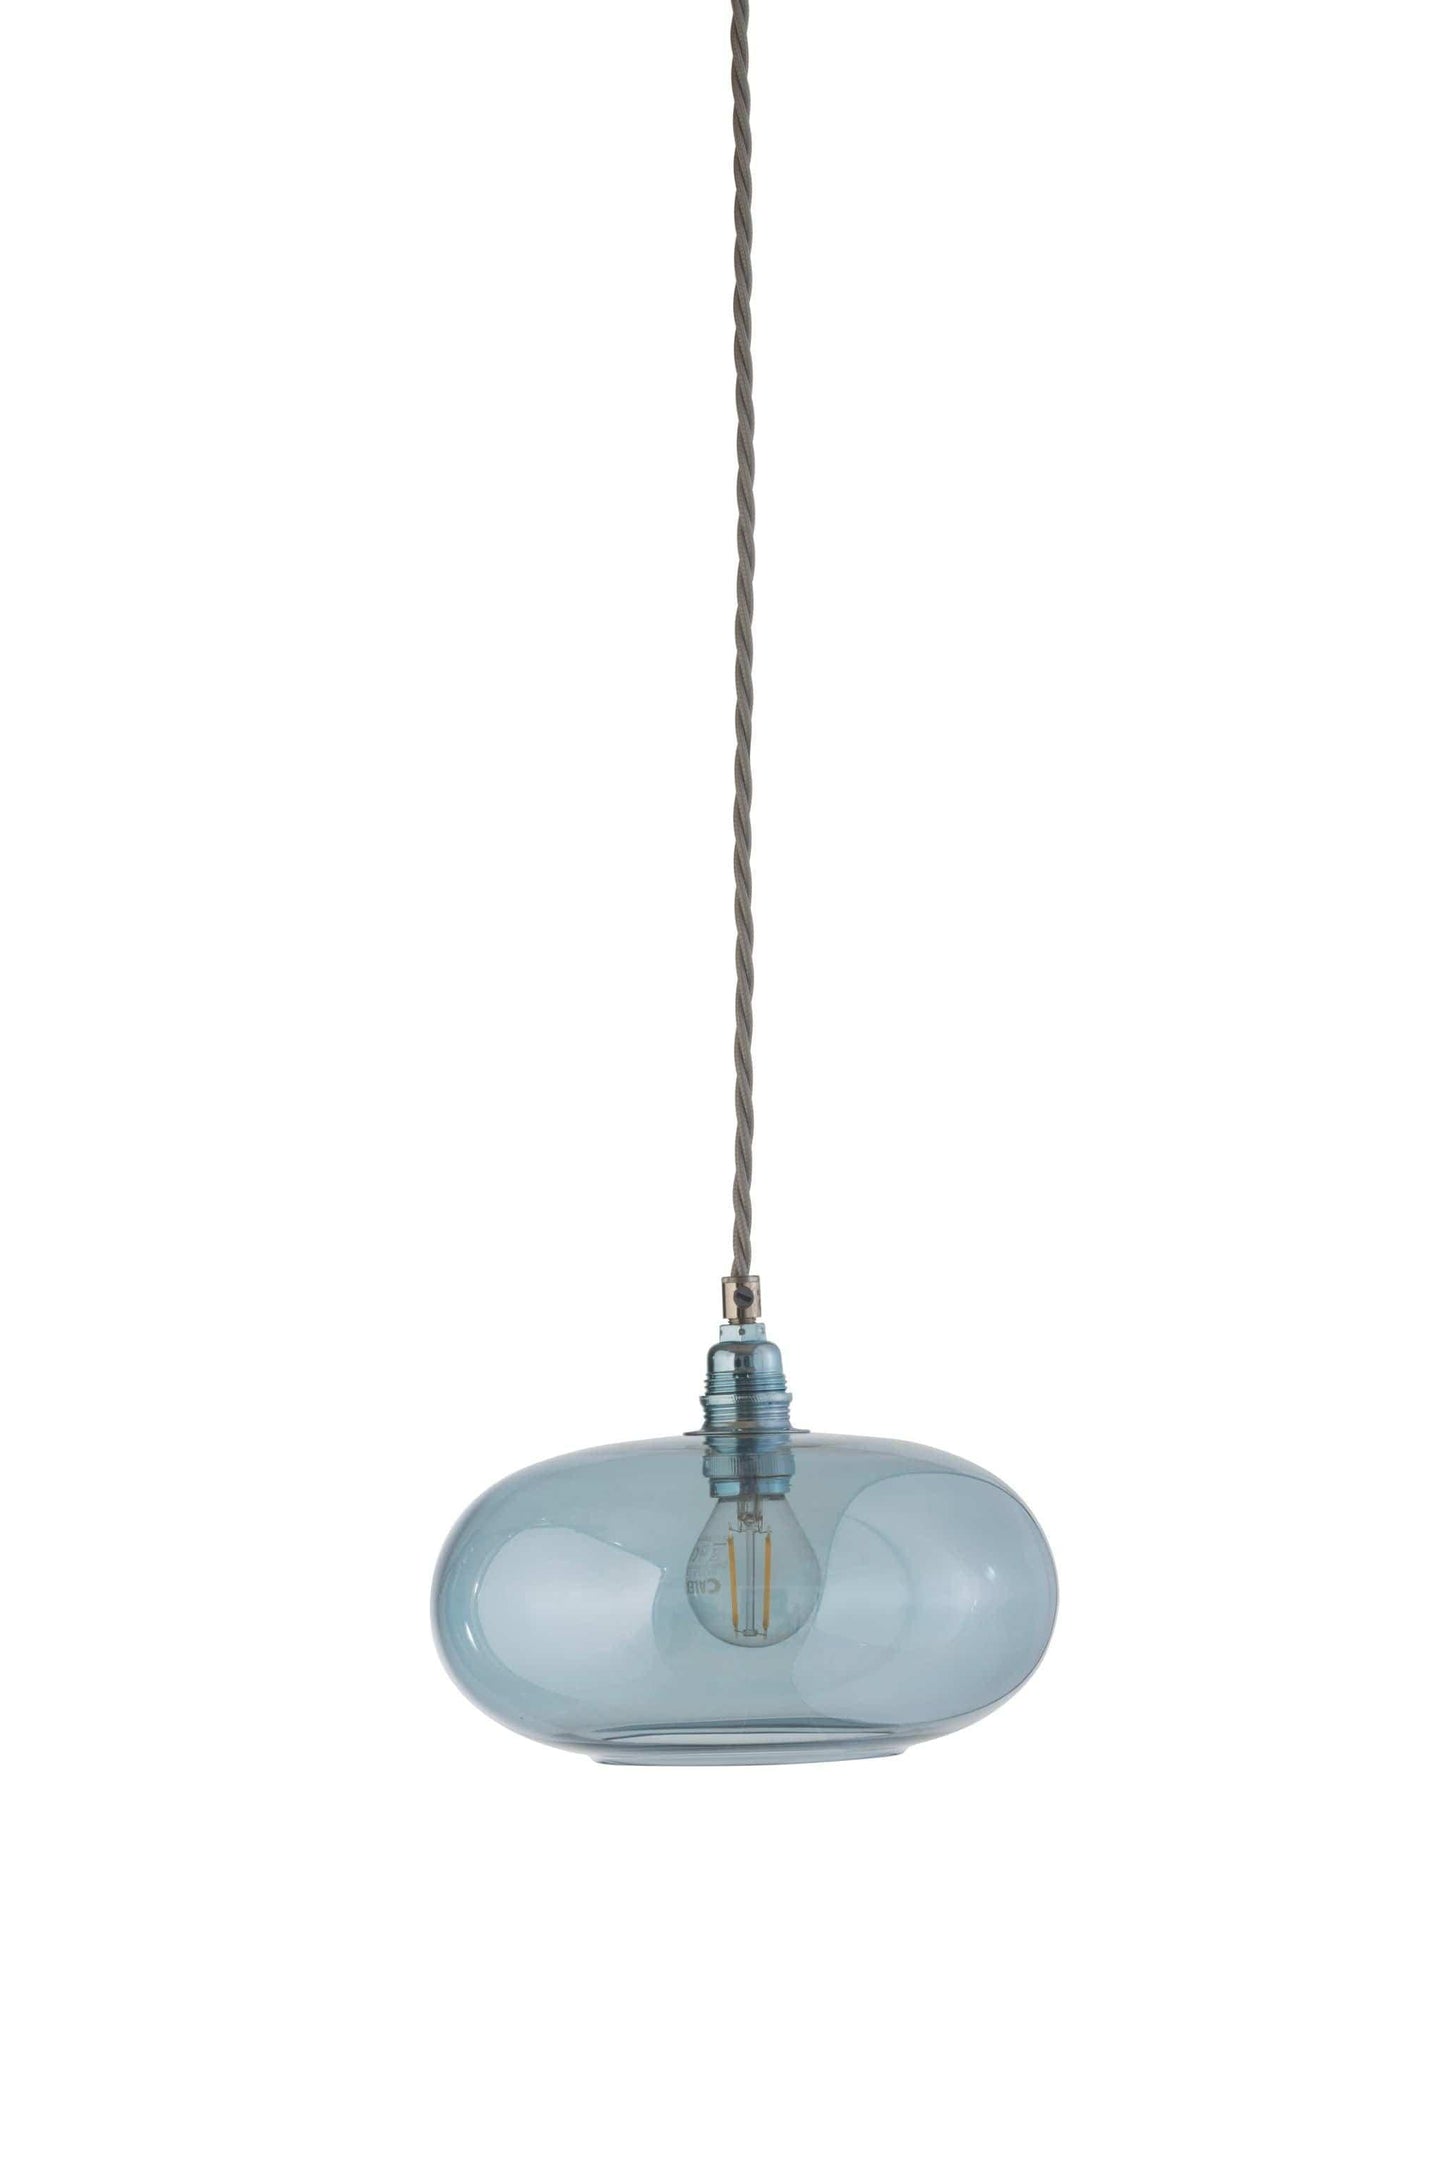 Ebb&Flow Pendant lights Topaz blue with silver fittings Horizon Mouth-Blown Glass Pendant Light, small